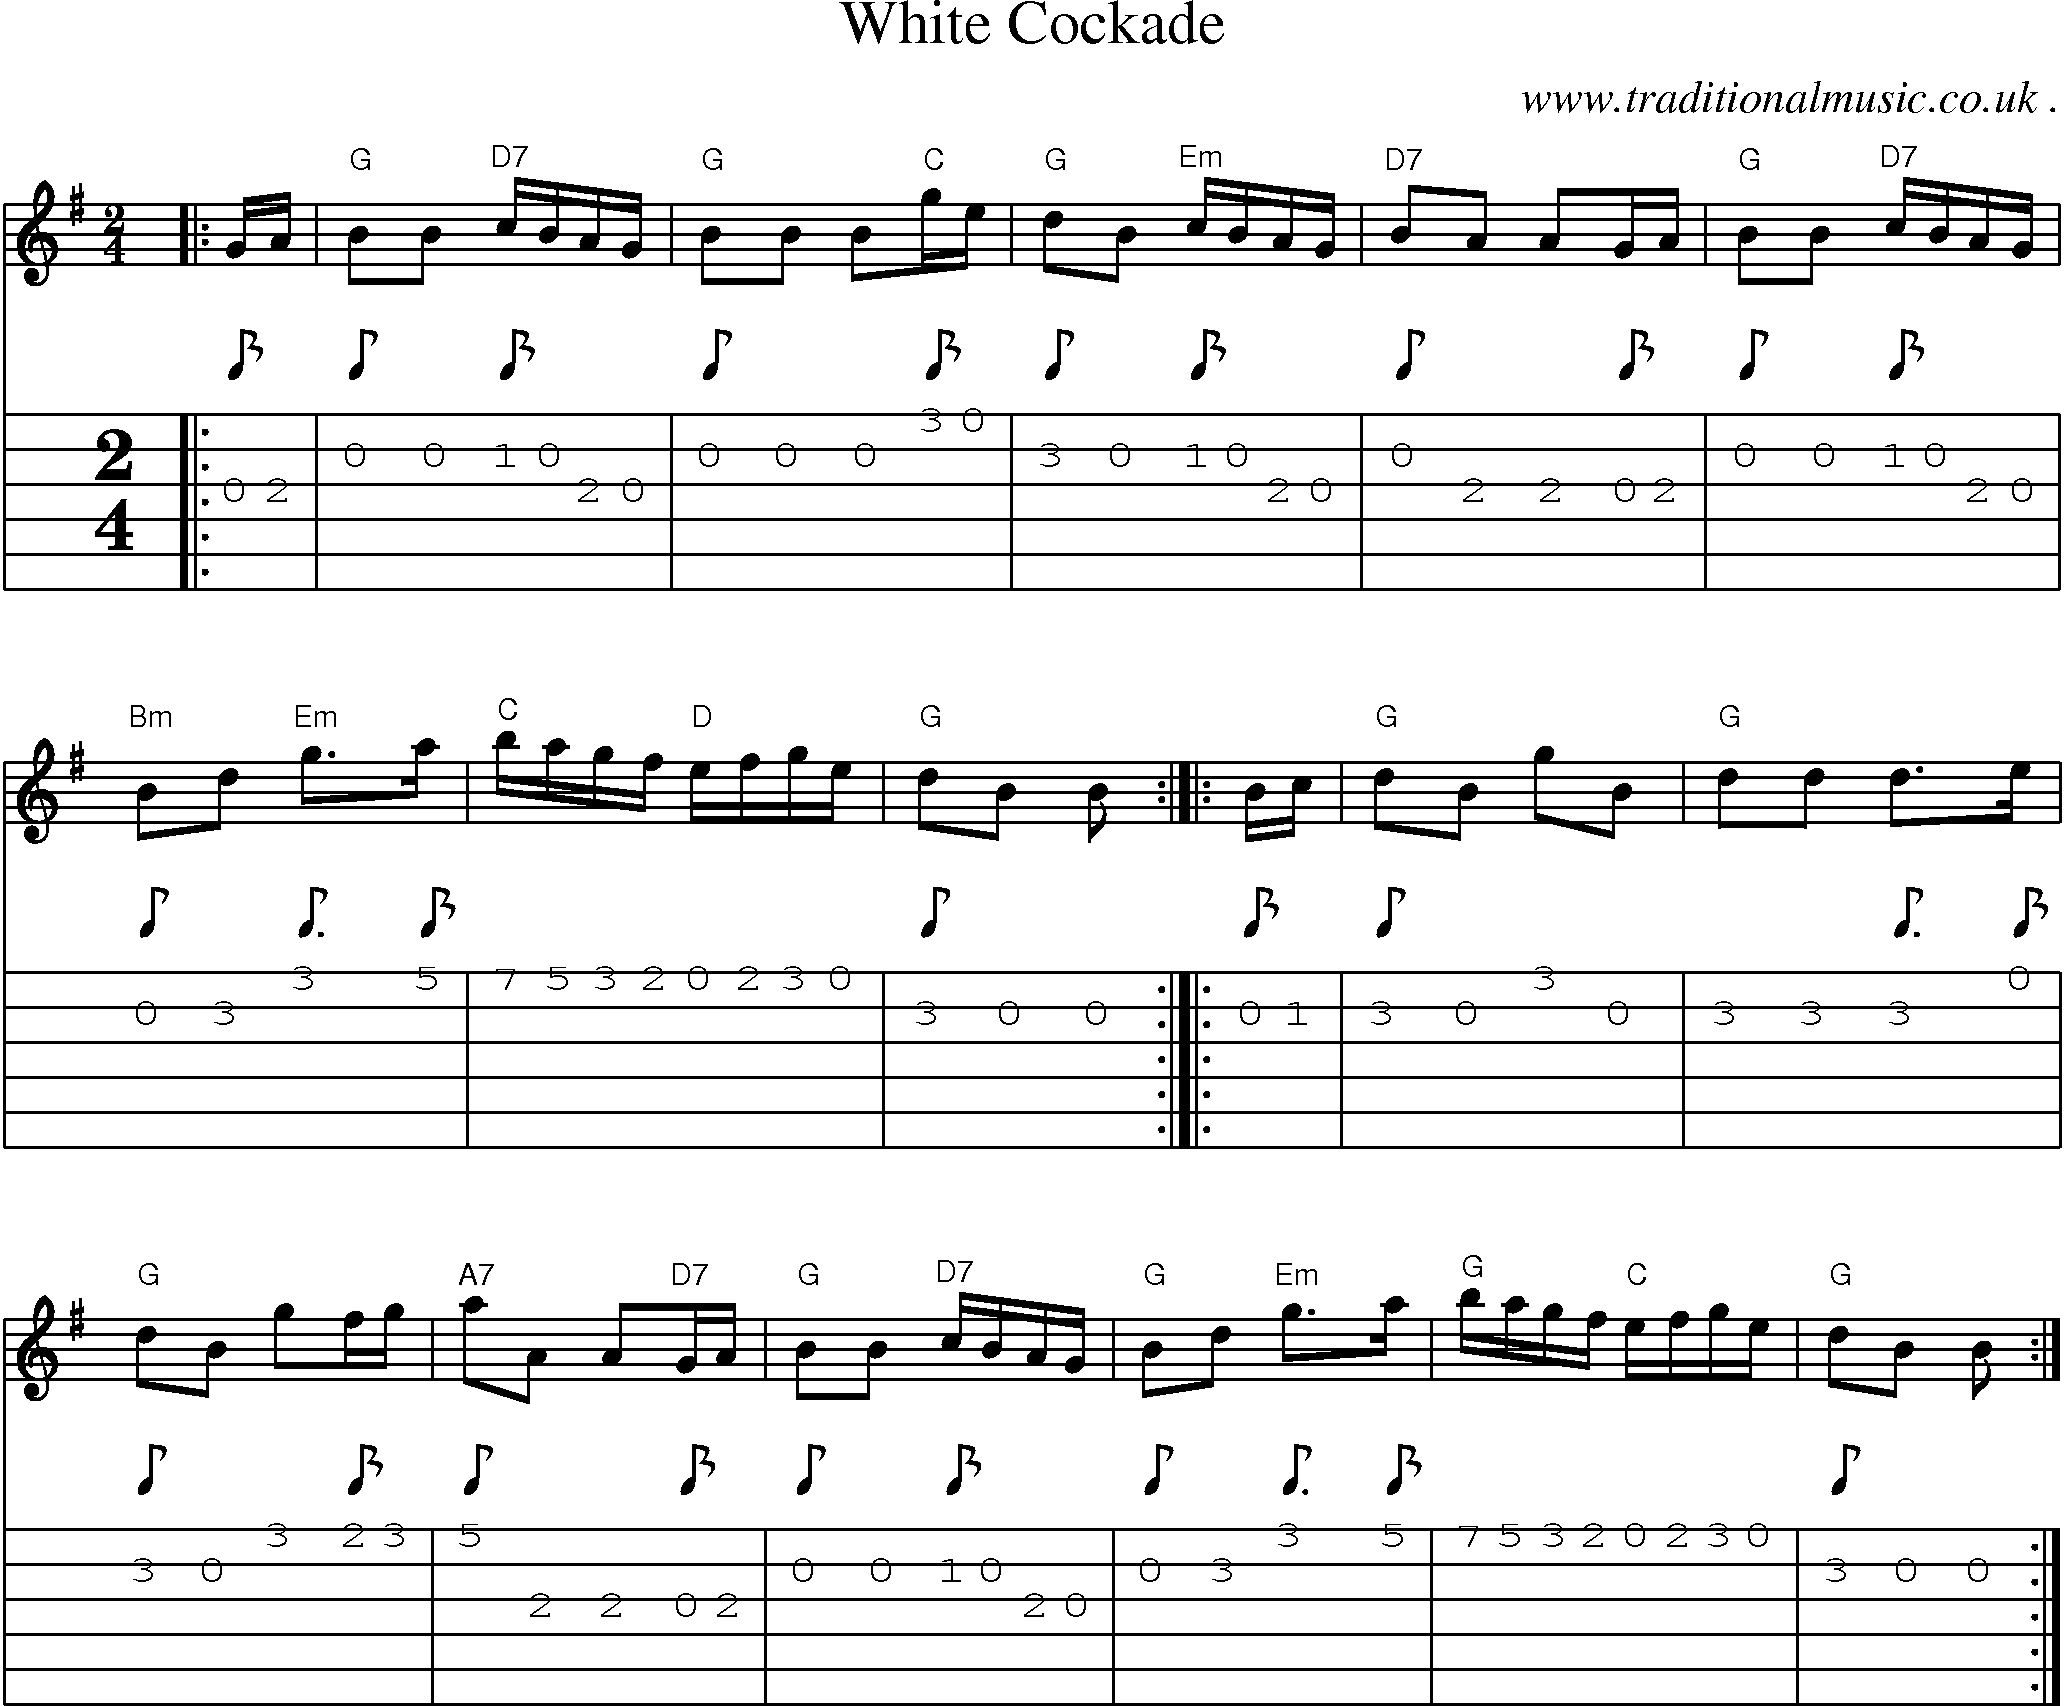 Music Score and Guitar Tabs for White Cockade